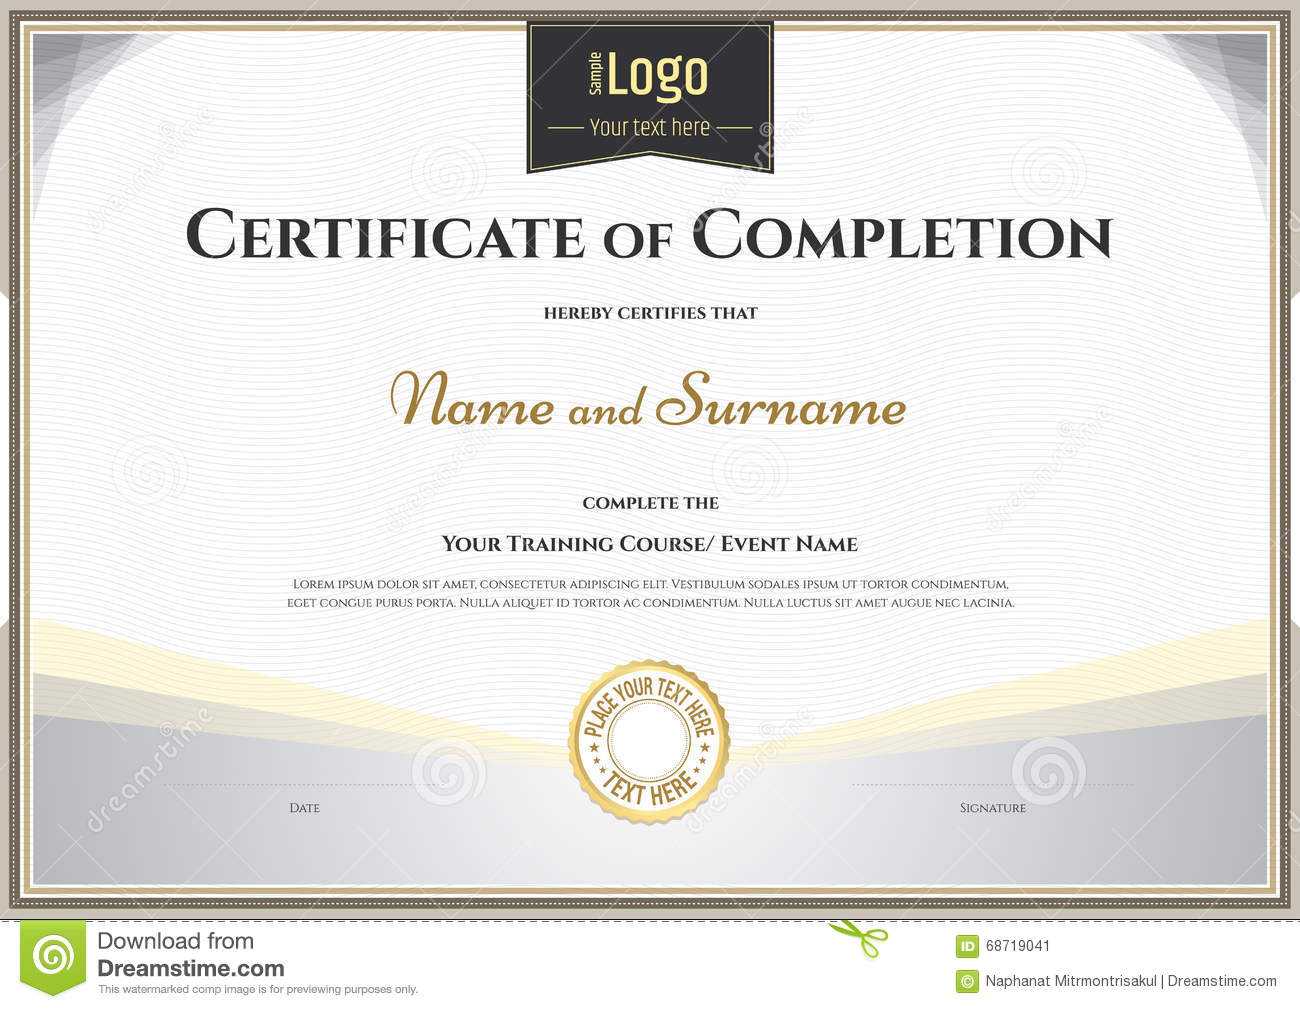 Certificate Of Completion Template In Vector For Achievement With Blank Certificate Of Achievement Template